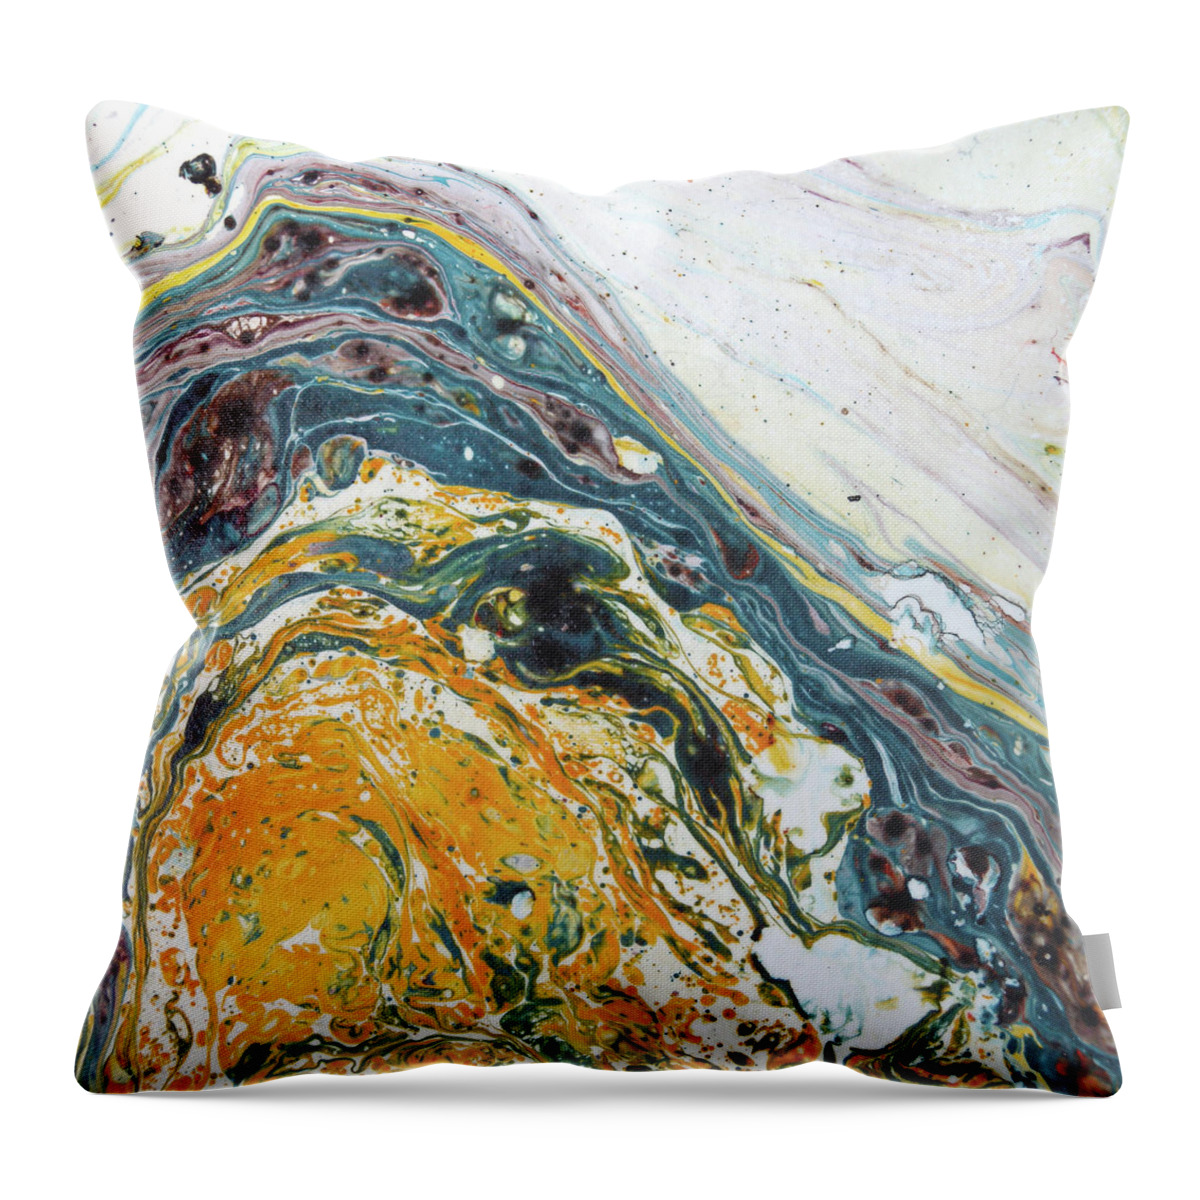 Agate Throw Pillow featuring the painting Agate by Lisa Lipsett